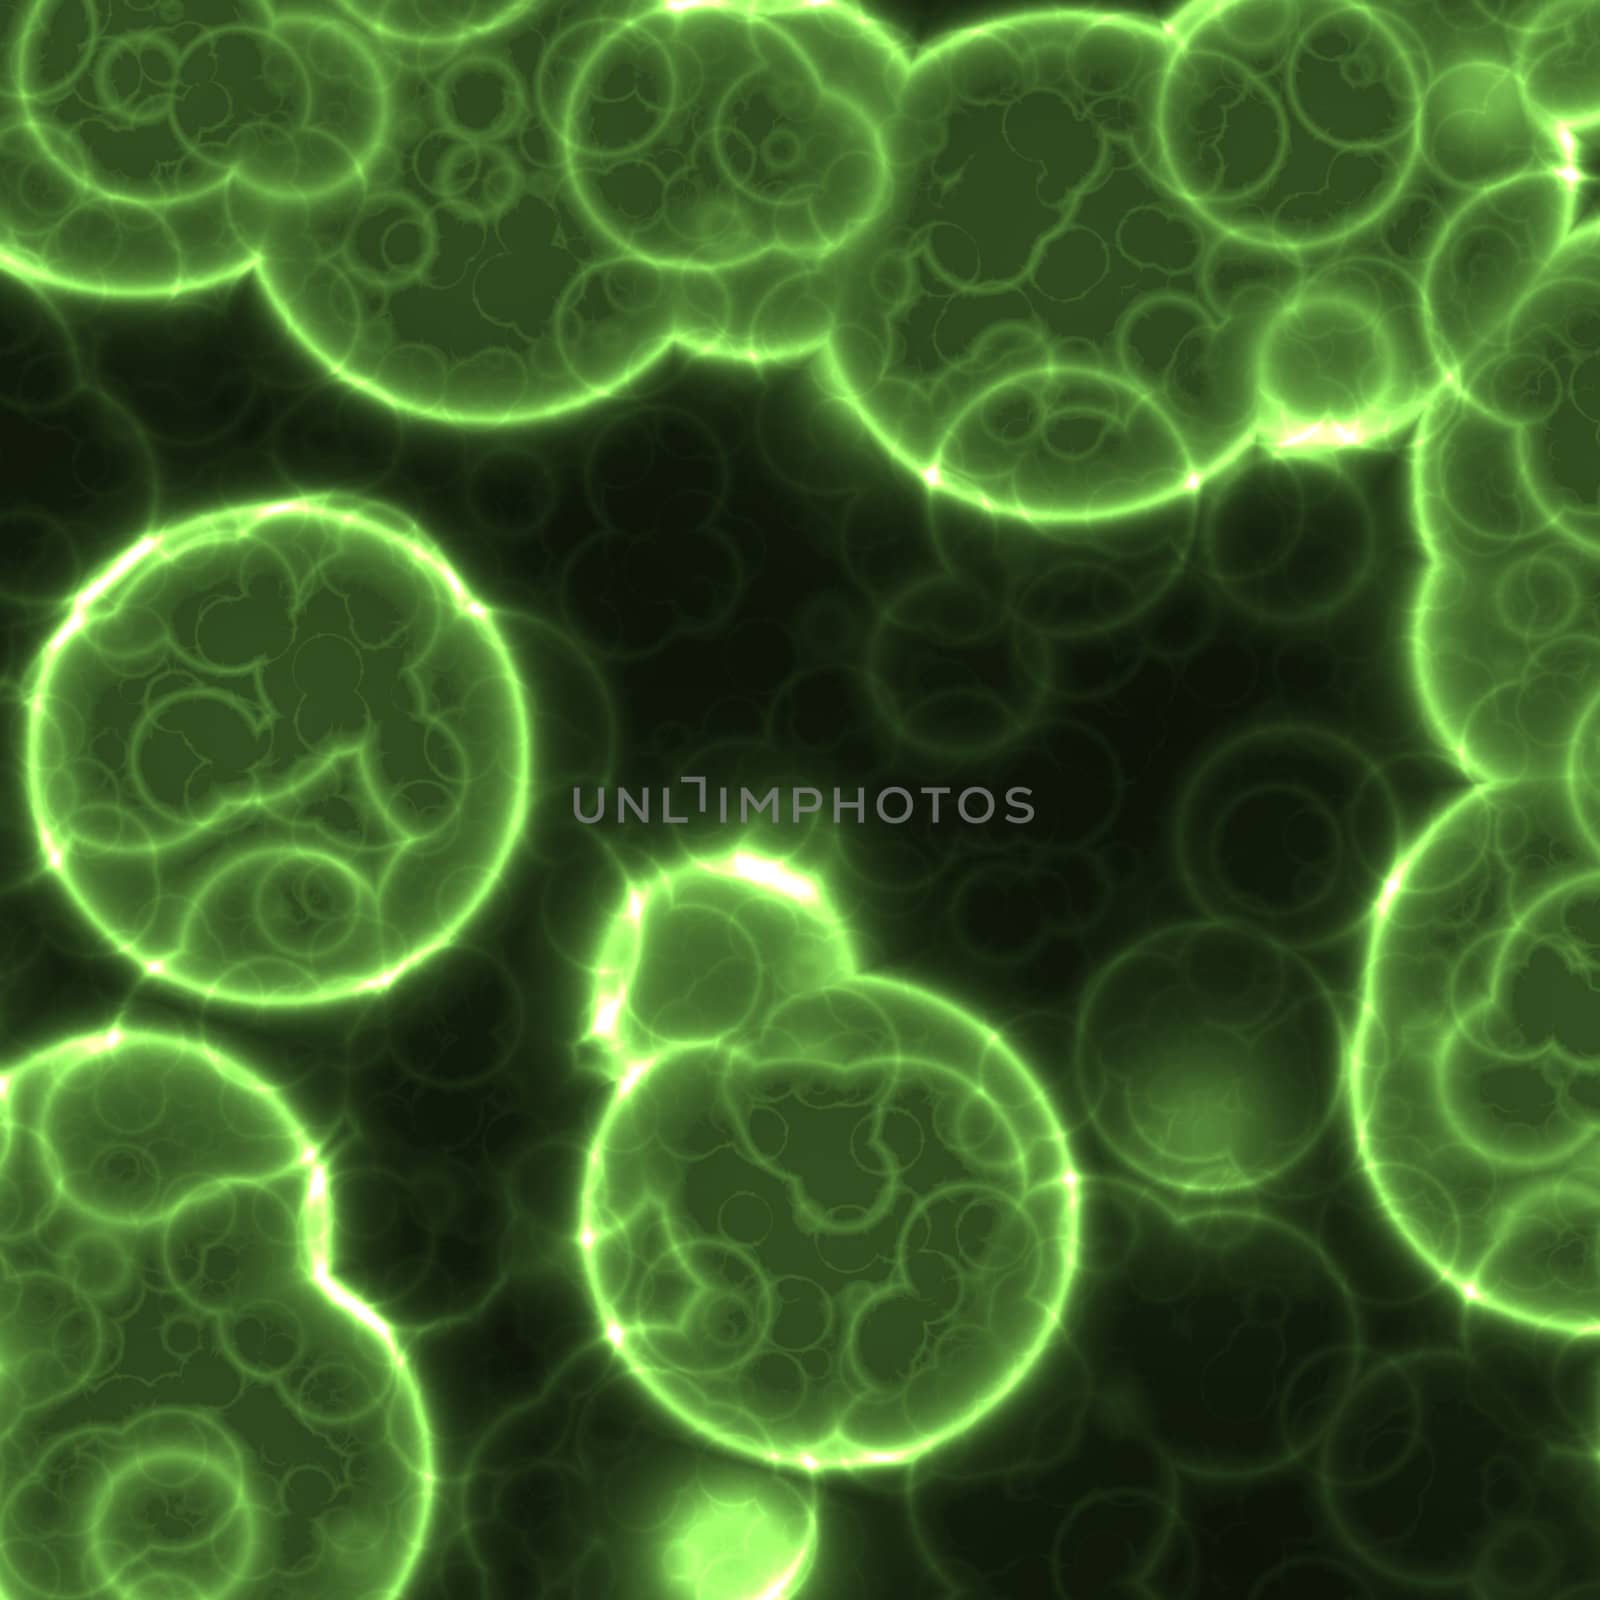 cells by clearviewstock